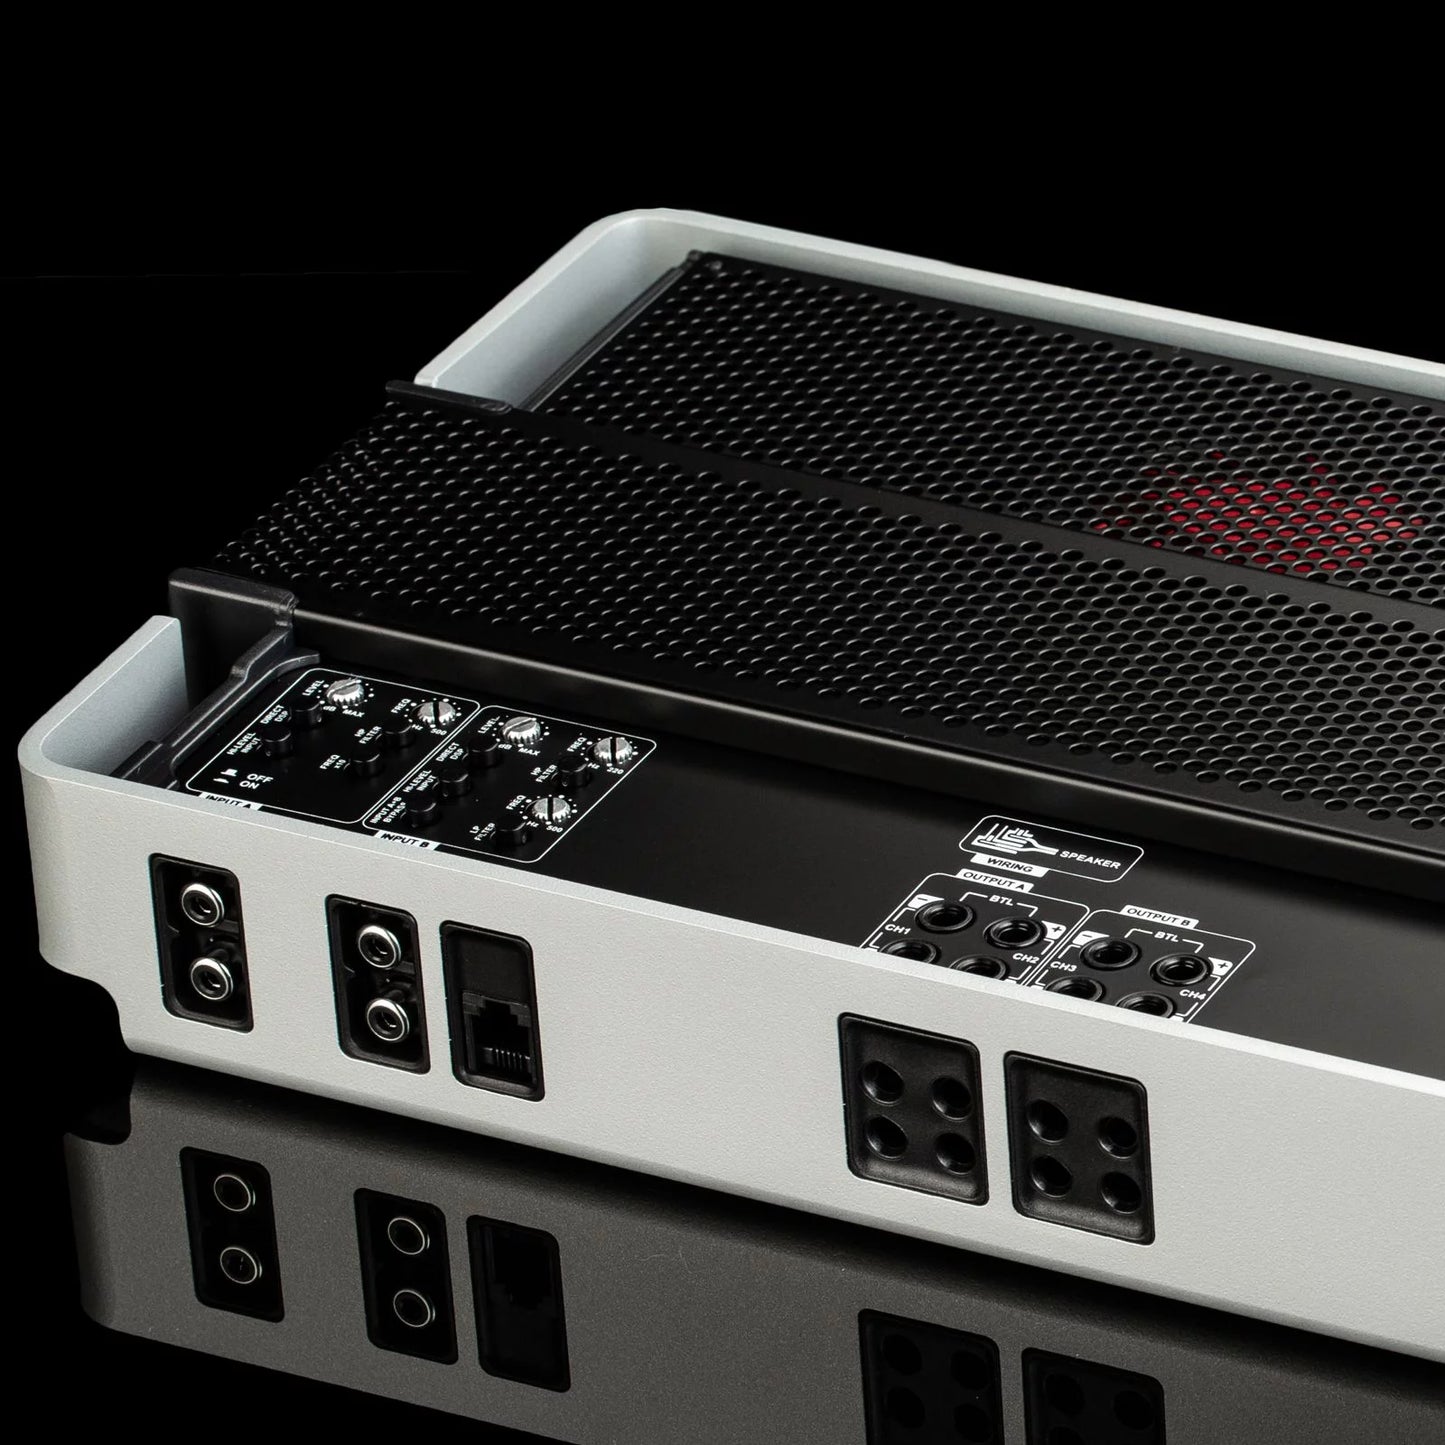 MOSCONI PRO 4|30 CLASS-AB 4-CHANNEL AMPLIFIER